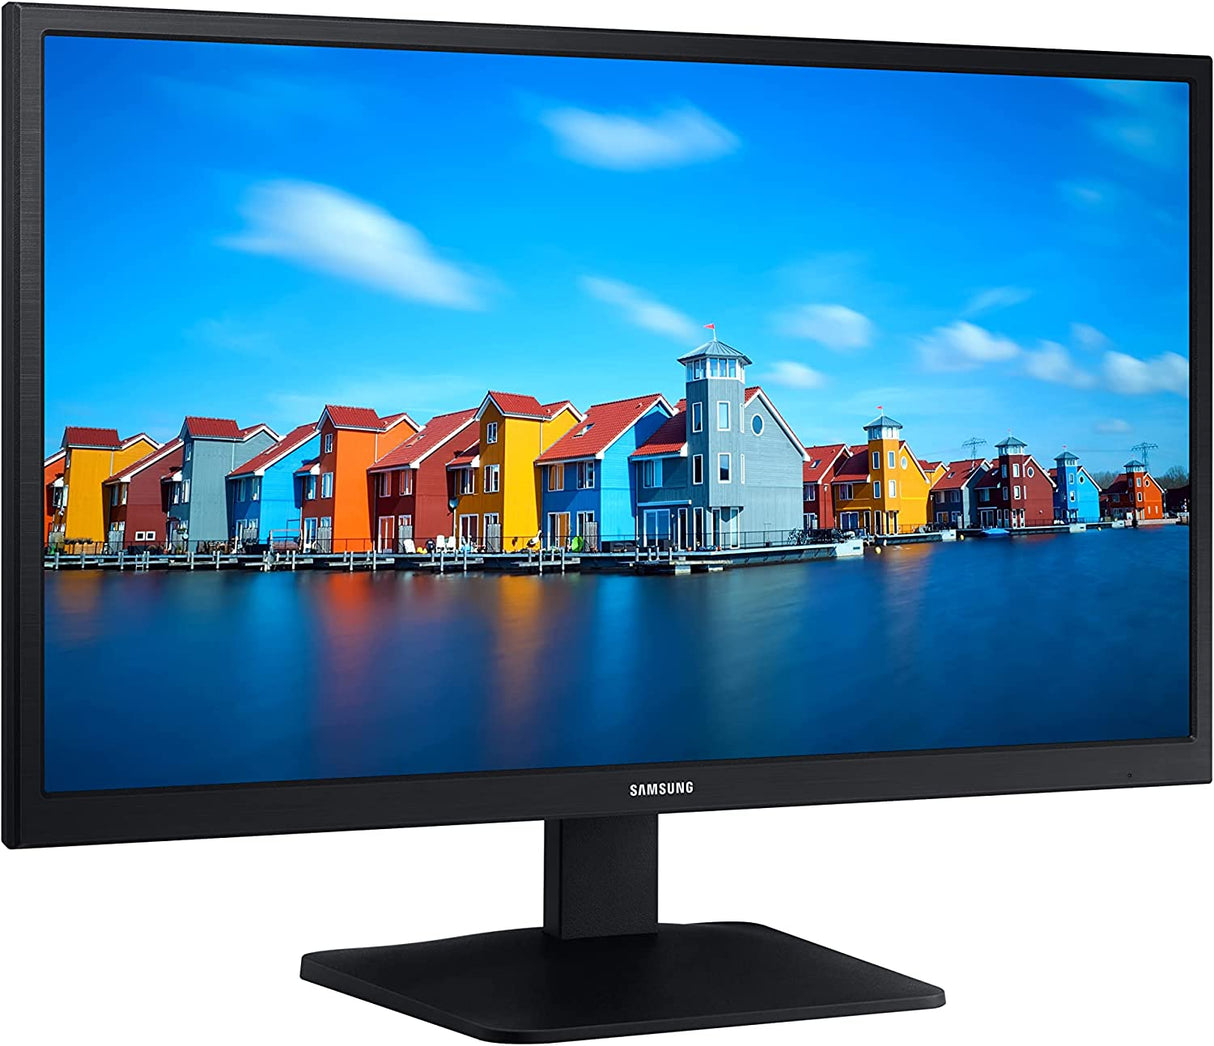 Samsung business 22" Wide Angle Monitor for Business